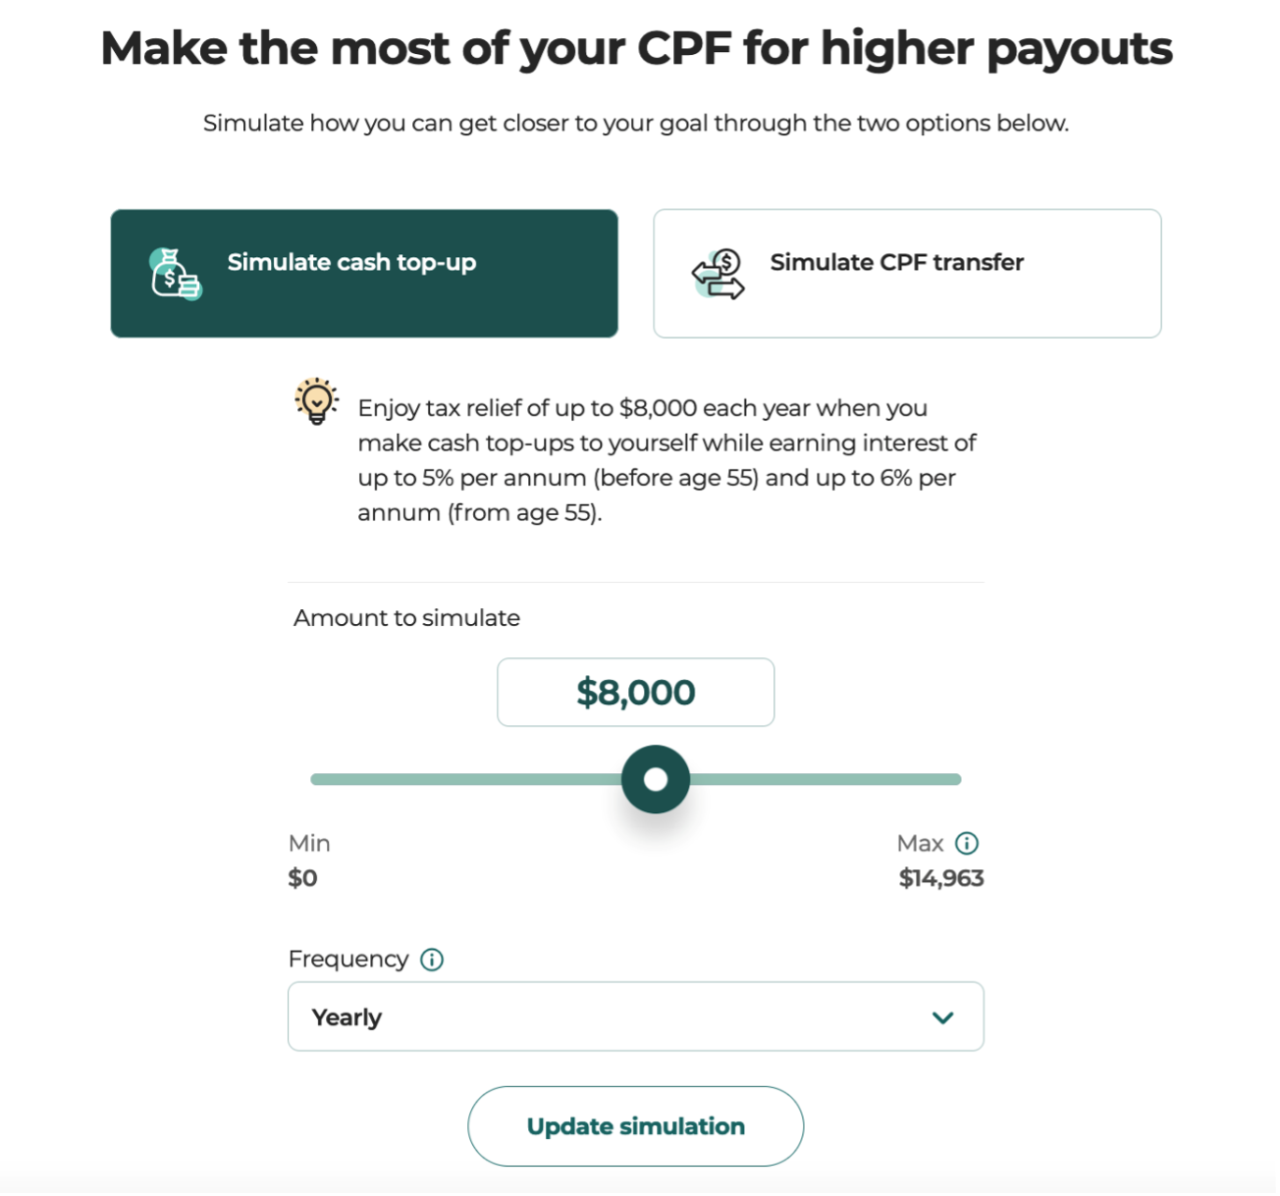 Screenshot of the CPF Planner - Stimulate cash top-up